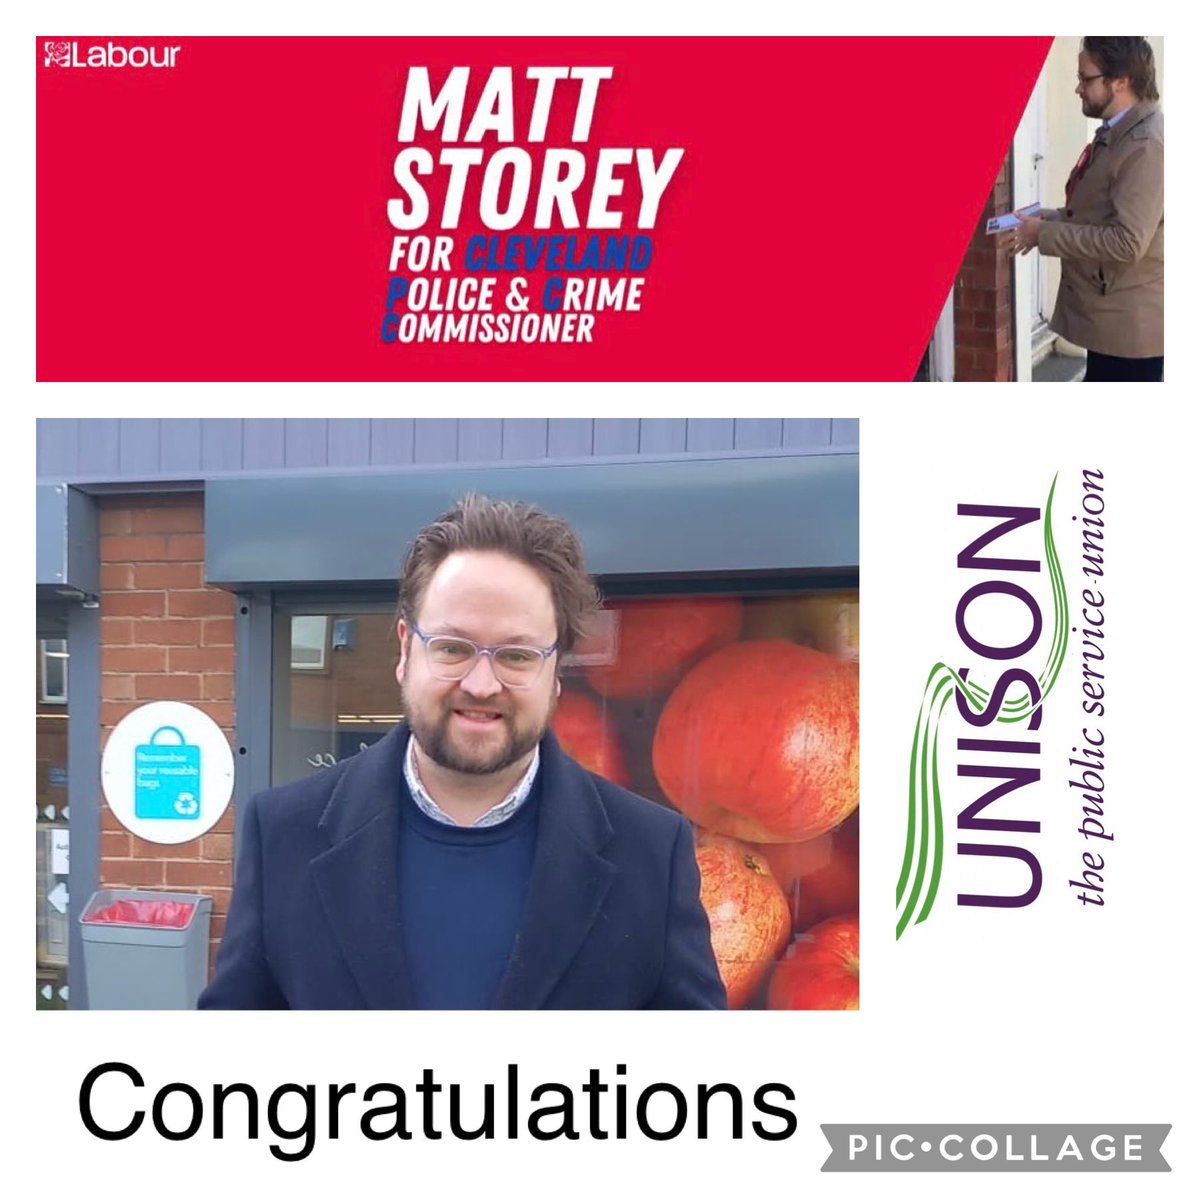 Congratulations to UNISON member Matt Storey, elected Police & Crime Commissioner for Cleveland. Matt will be a great PCC for people in the Cleveland Police area.